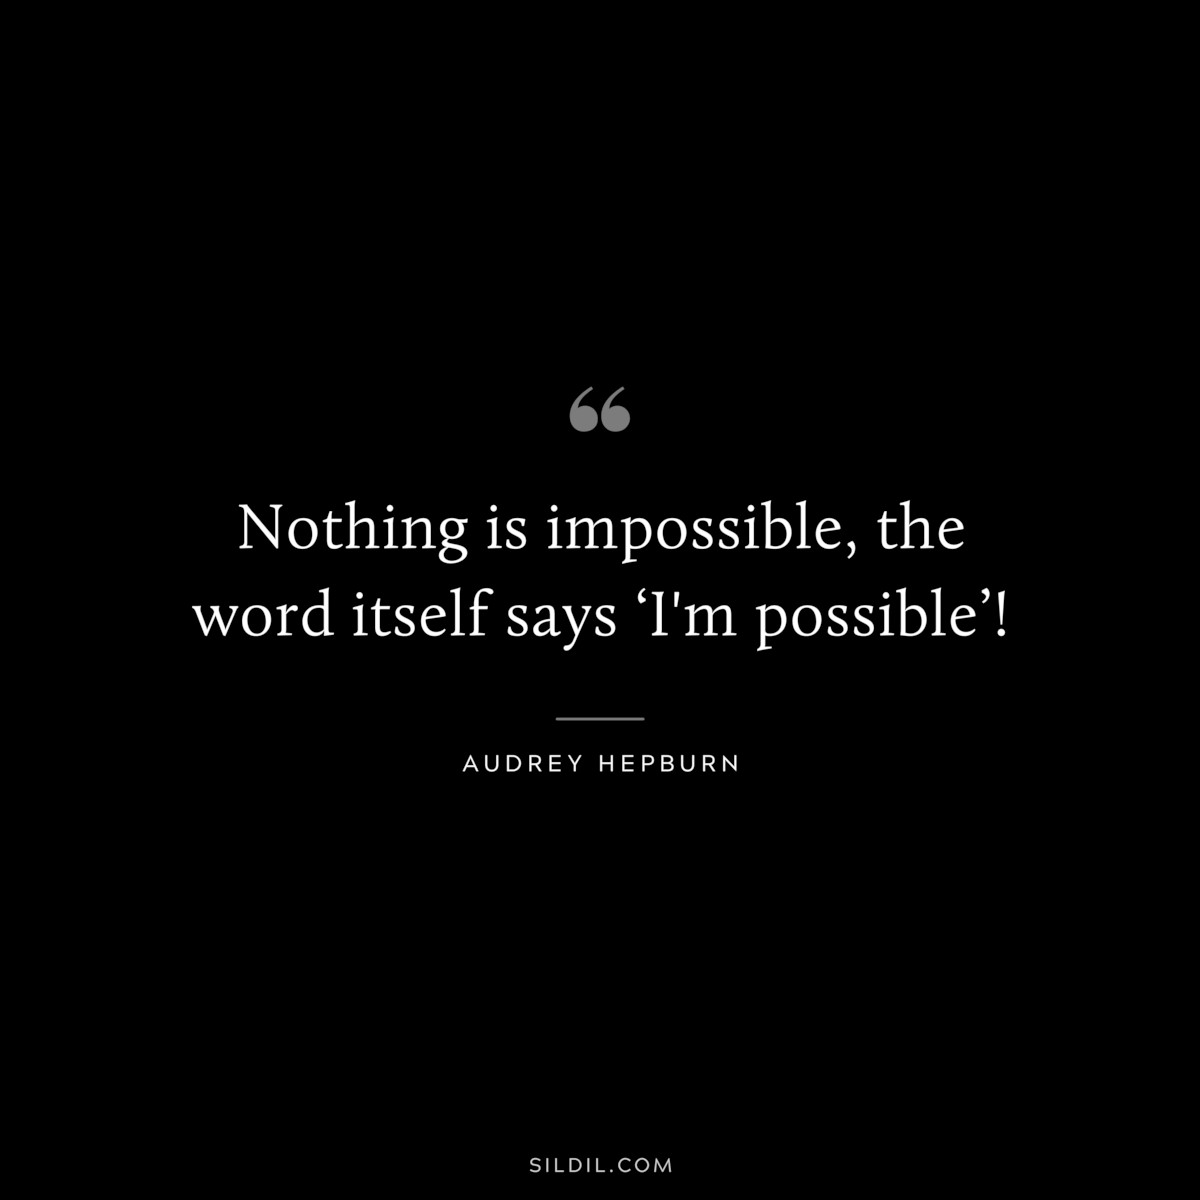 Nothing is impossible, the word itself says ‘I'm possible’! ― Audrey Hepburn